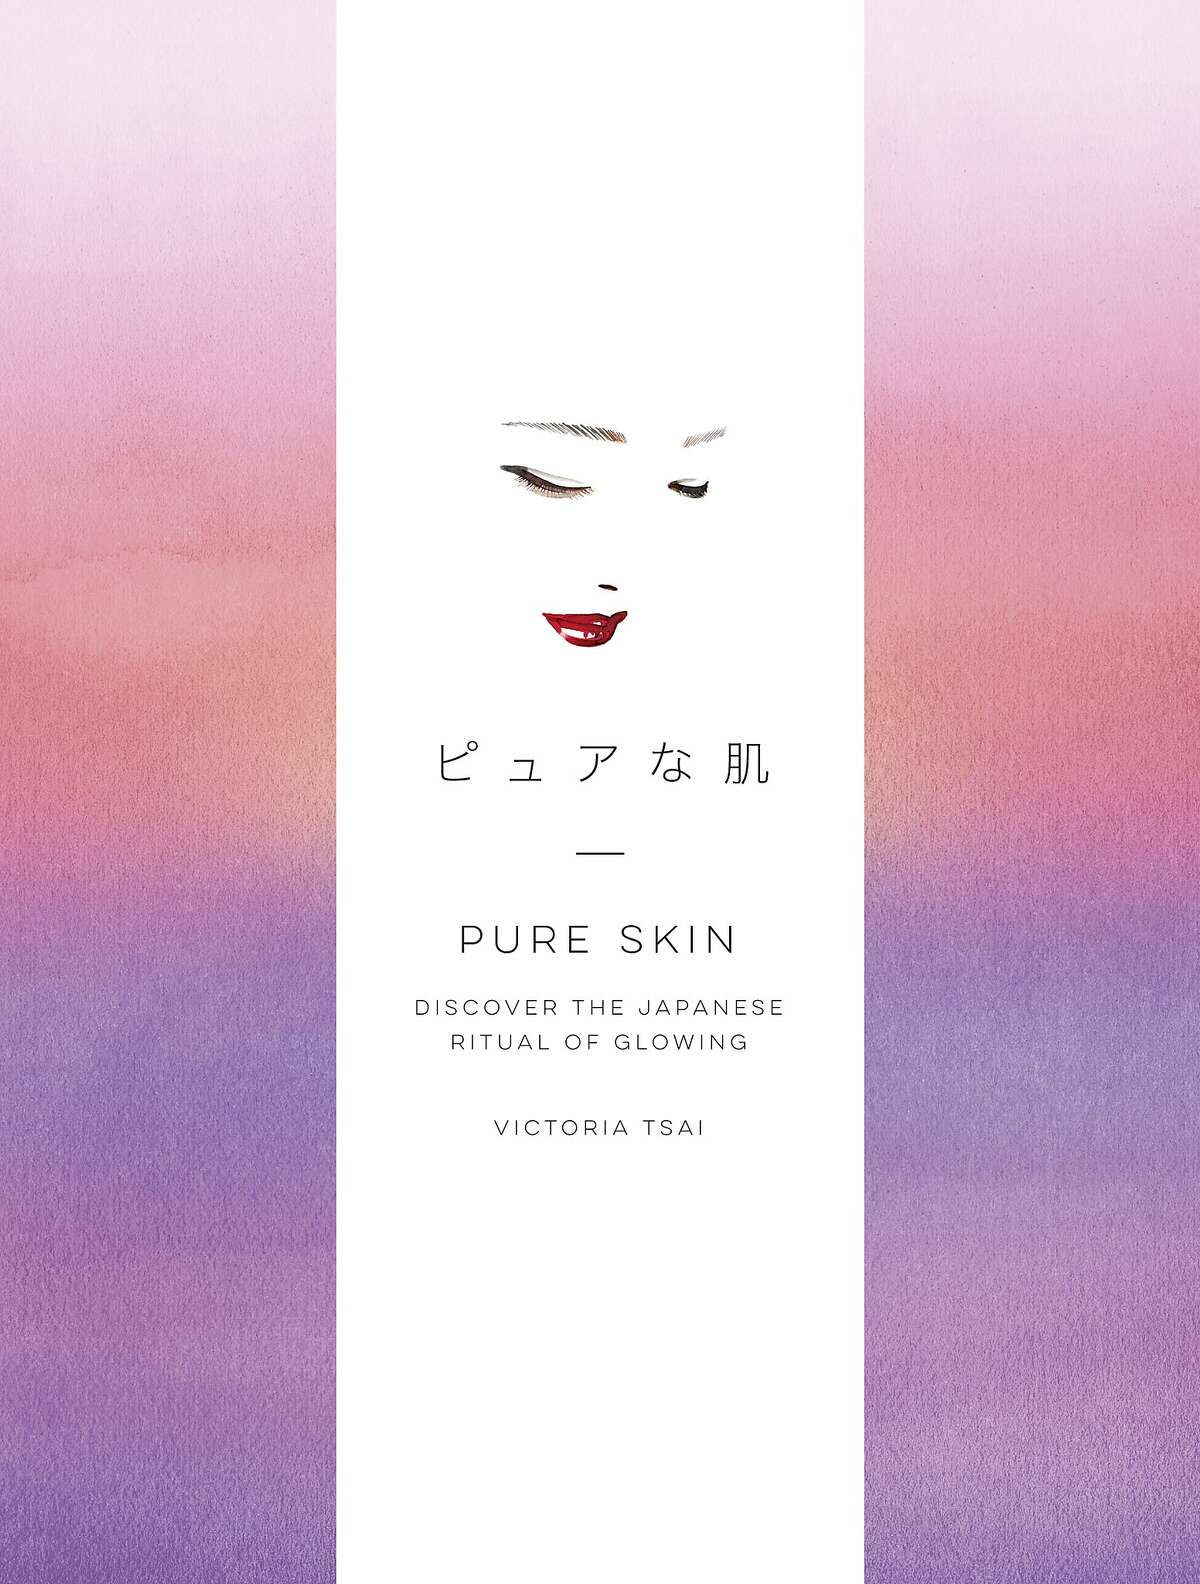 �Pure Skin: Discover the Japanese Ritual of Glowing� (Clarkson-Potter; 128 pages; $18) by Tatcha founder and CEO Victoria Tsai is full of interesting historical tidbits about Japanese culture and the geisha and how those tidbits can translate to modern-day beauty, accompanied by stunning illustrations.